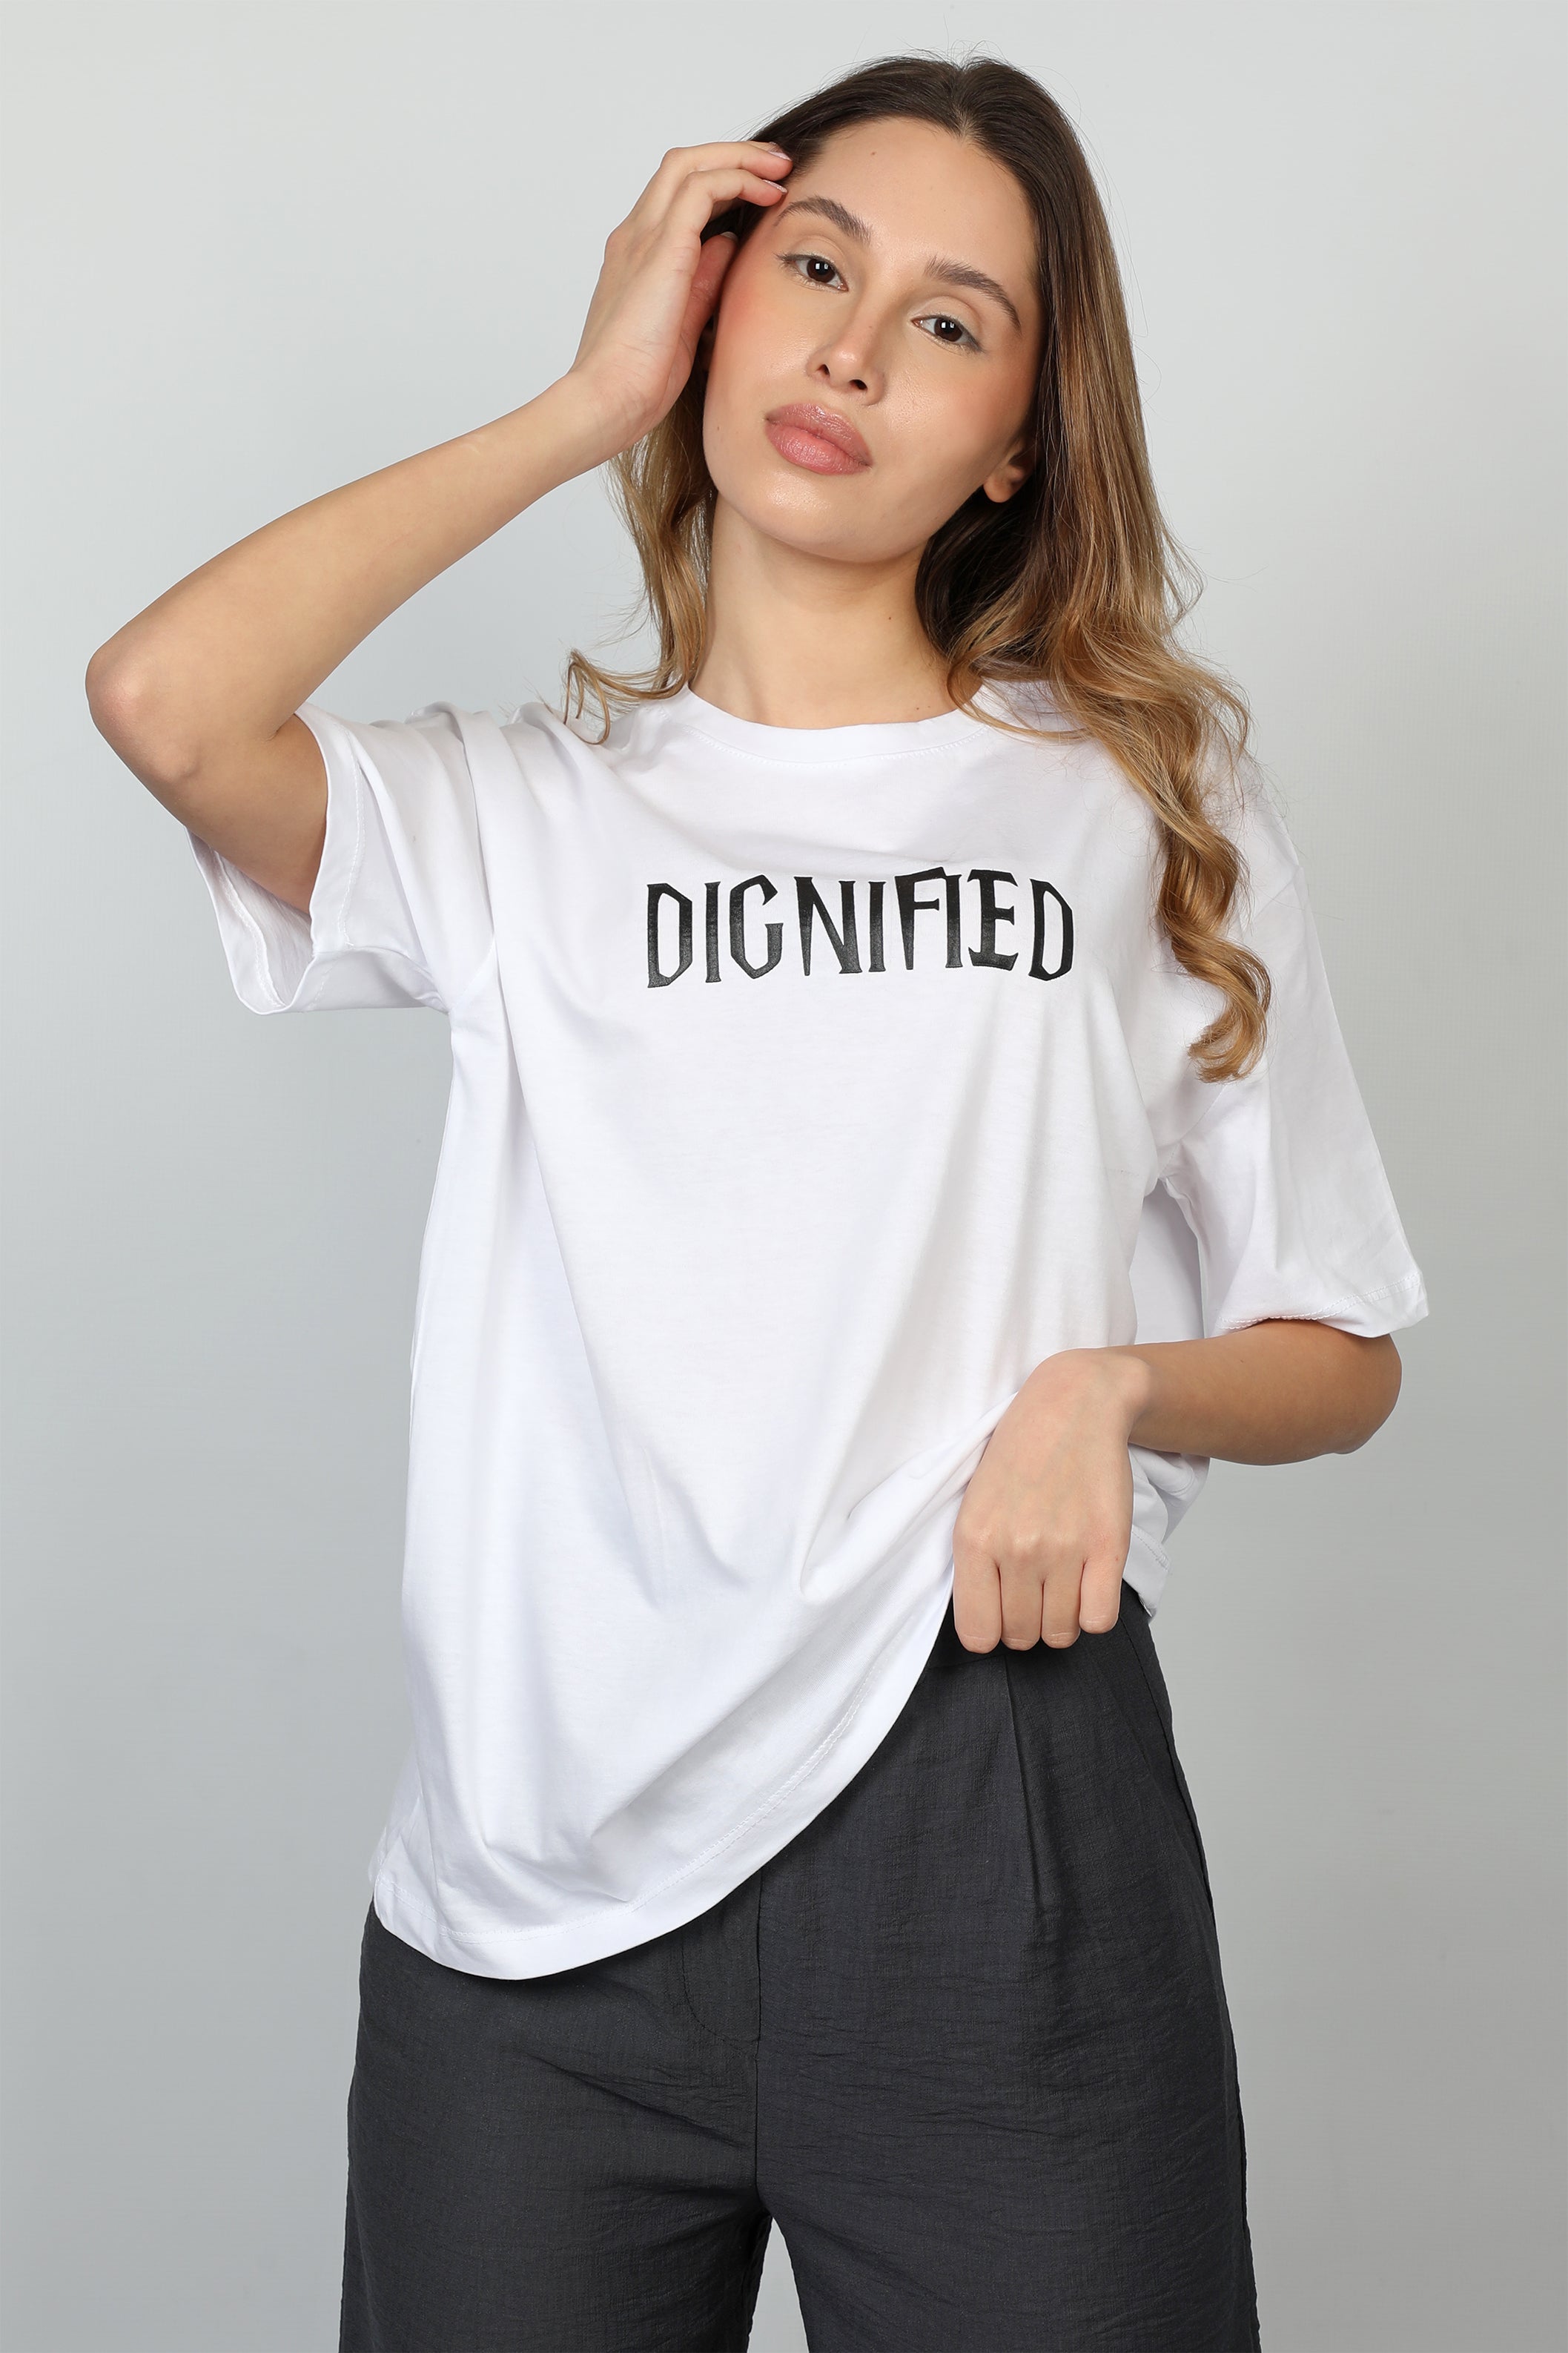 "DIGNIFIED" Printed White Oversized T-shirt